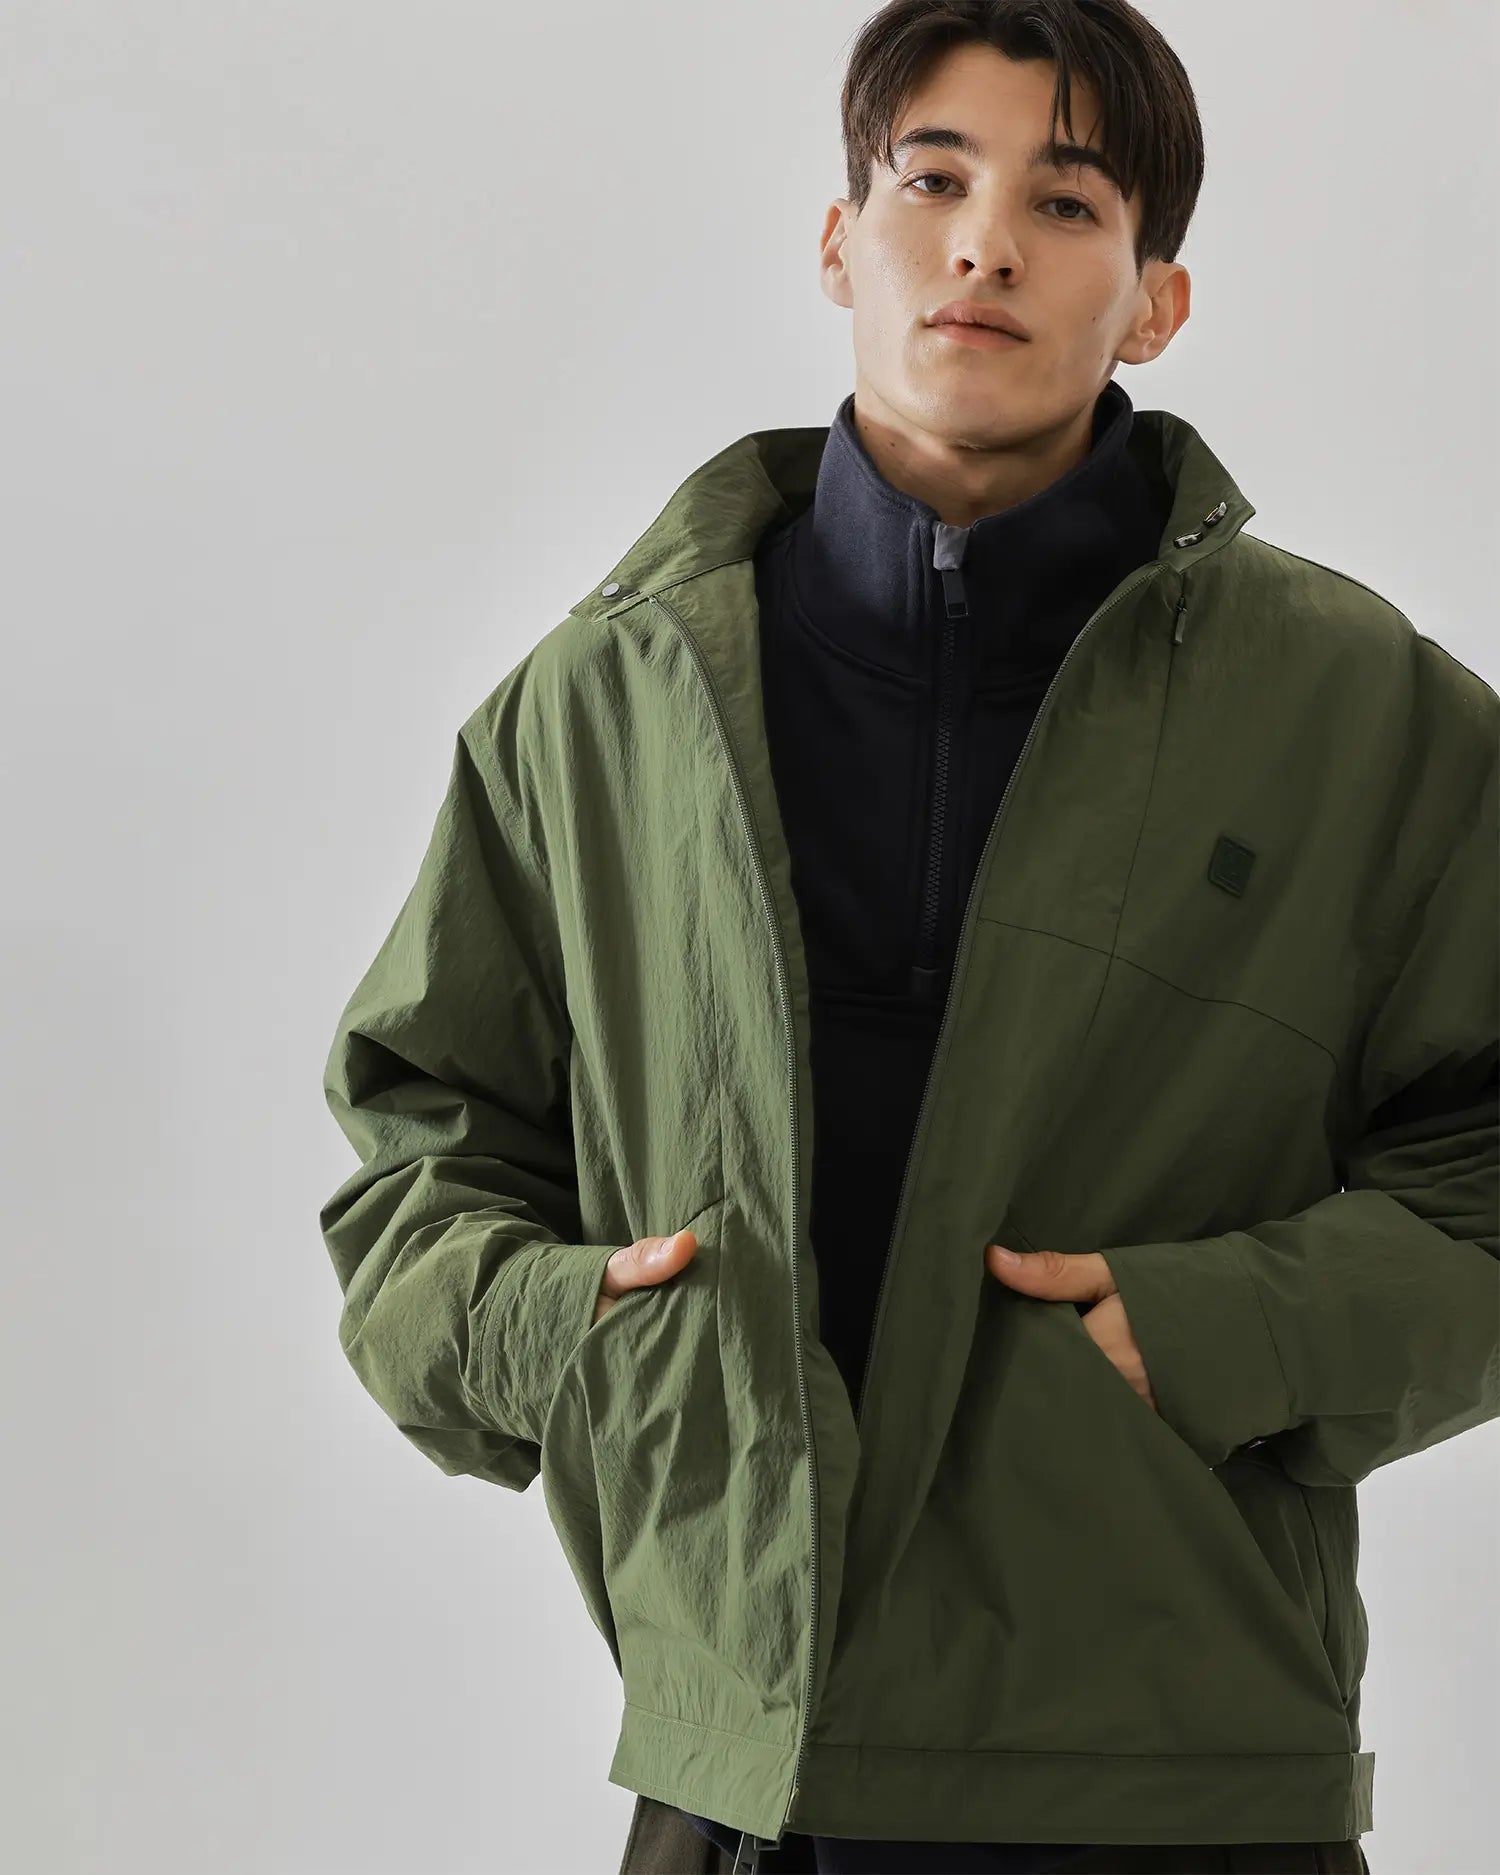 Men's Crew Jacket in Military Green 06 #military-green